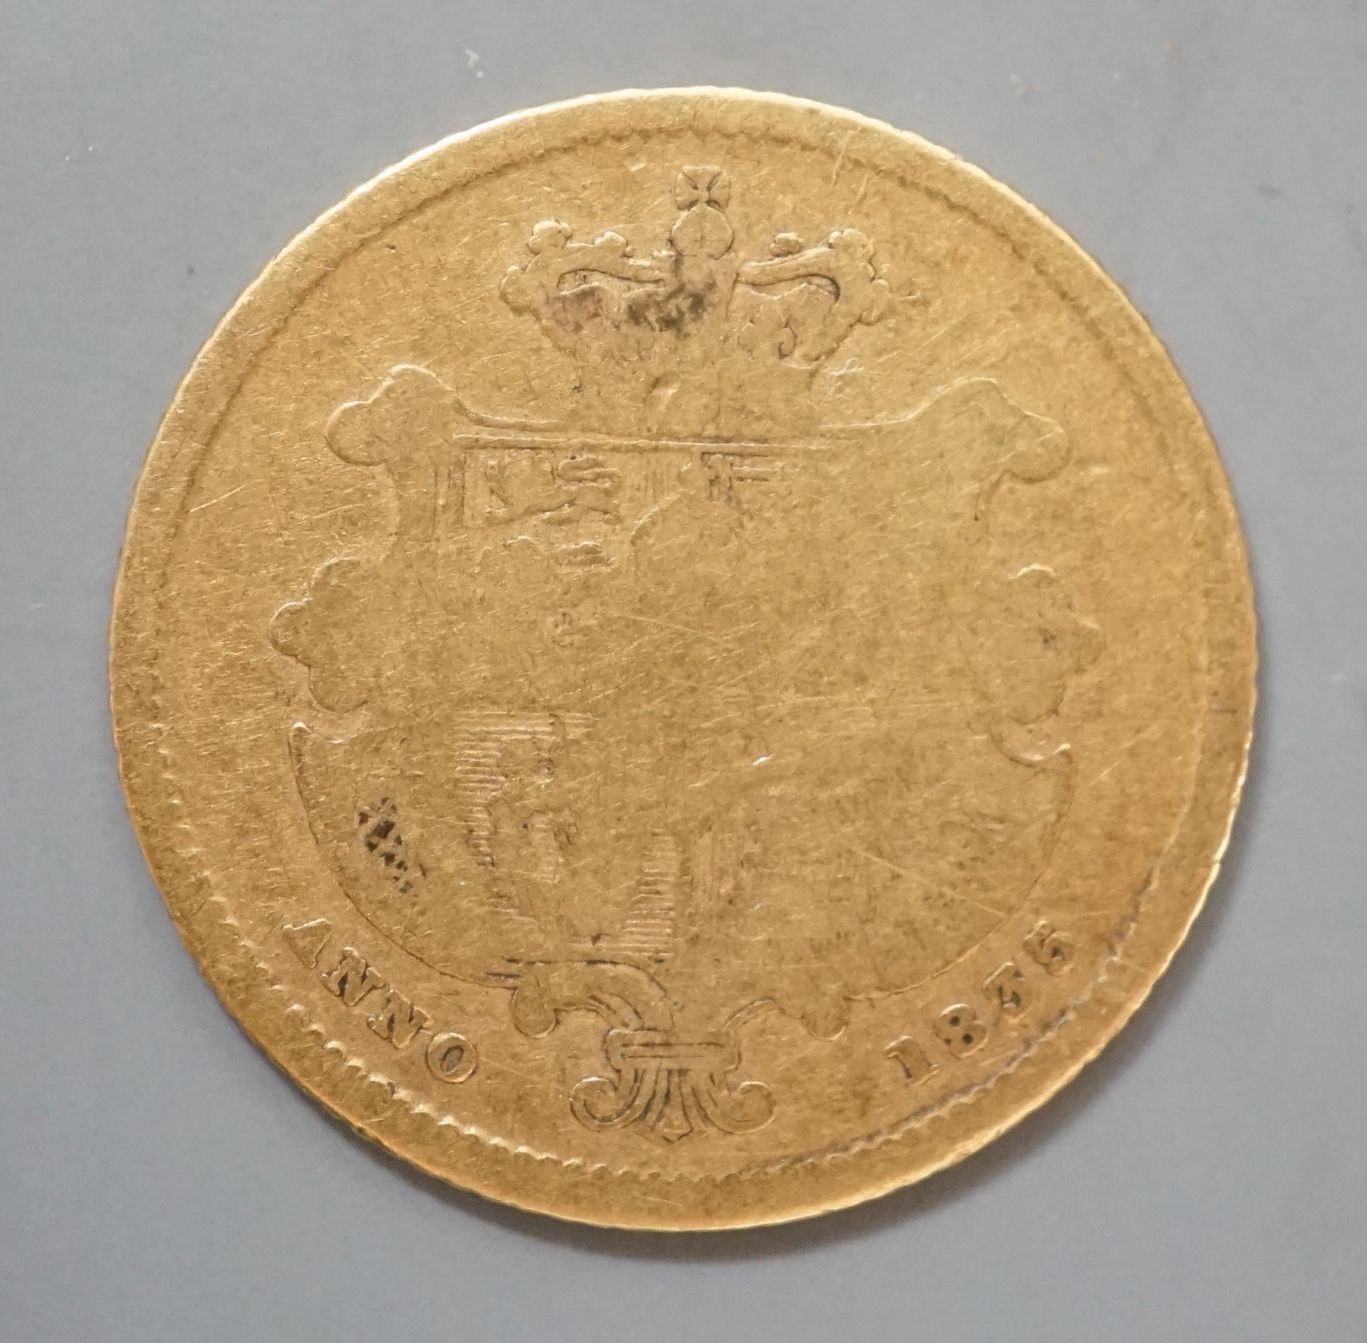 A William IV gold half sovereign, 1835, VG or better.